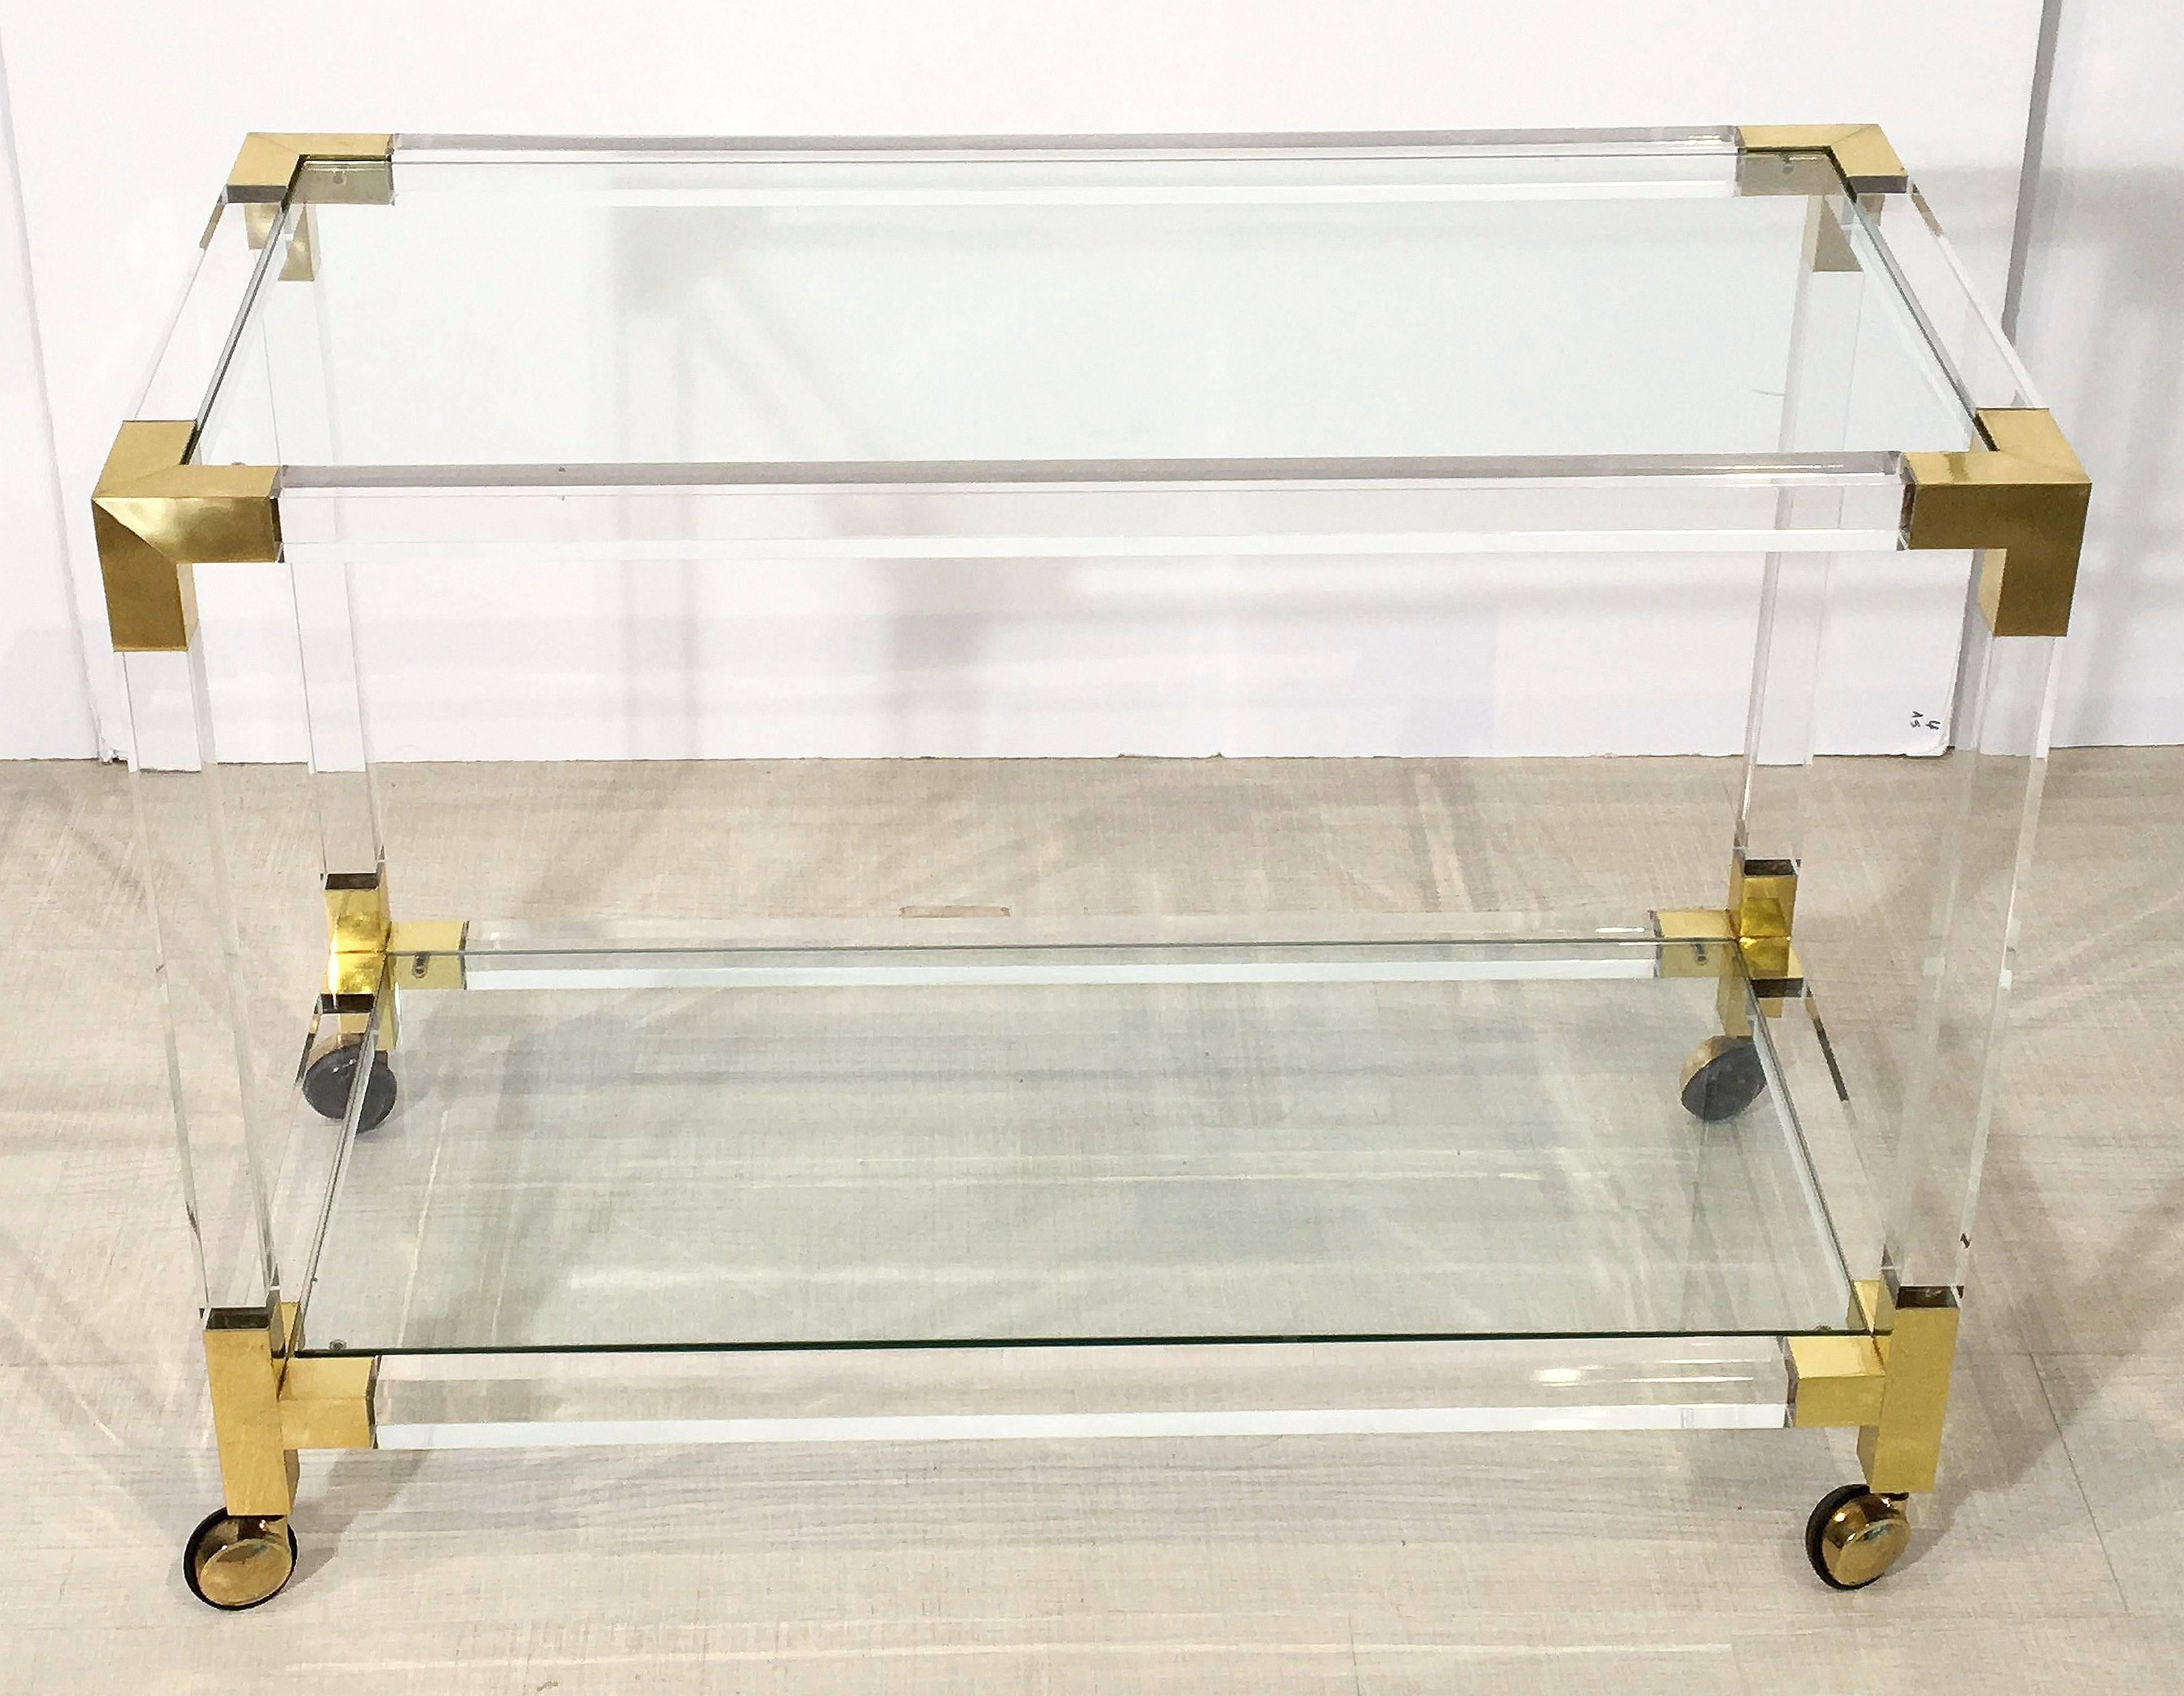 A fine French drinks trolley or bar cart, featuring two tiers of fitted rectangular glass in a clear Lucite frame with brass accents, on rolling casters.

Makes a great side or occasional table.